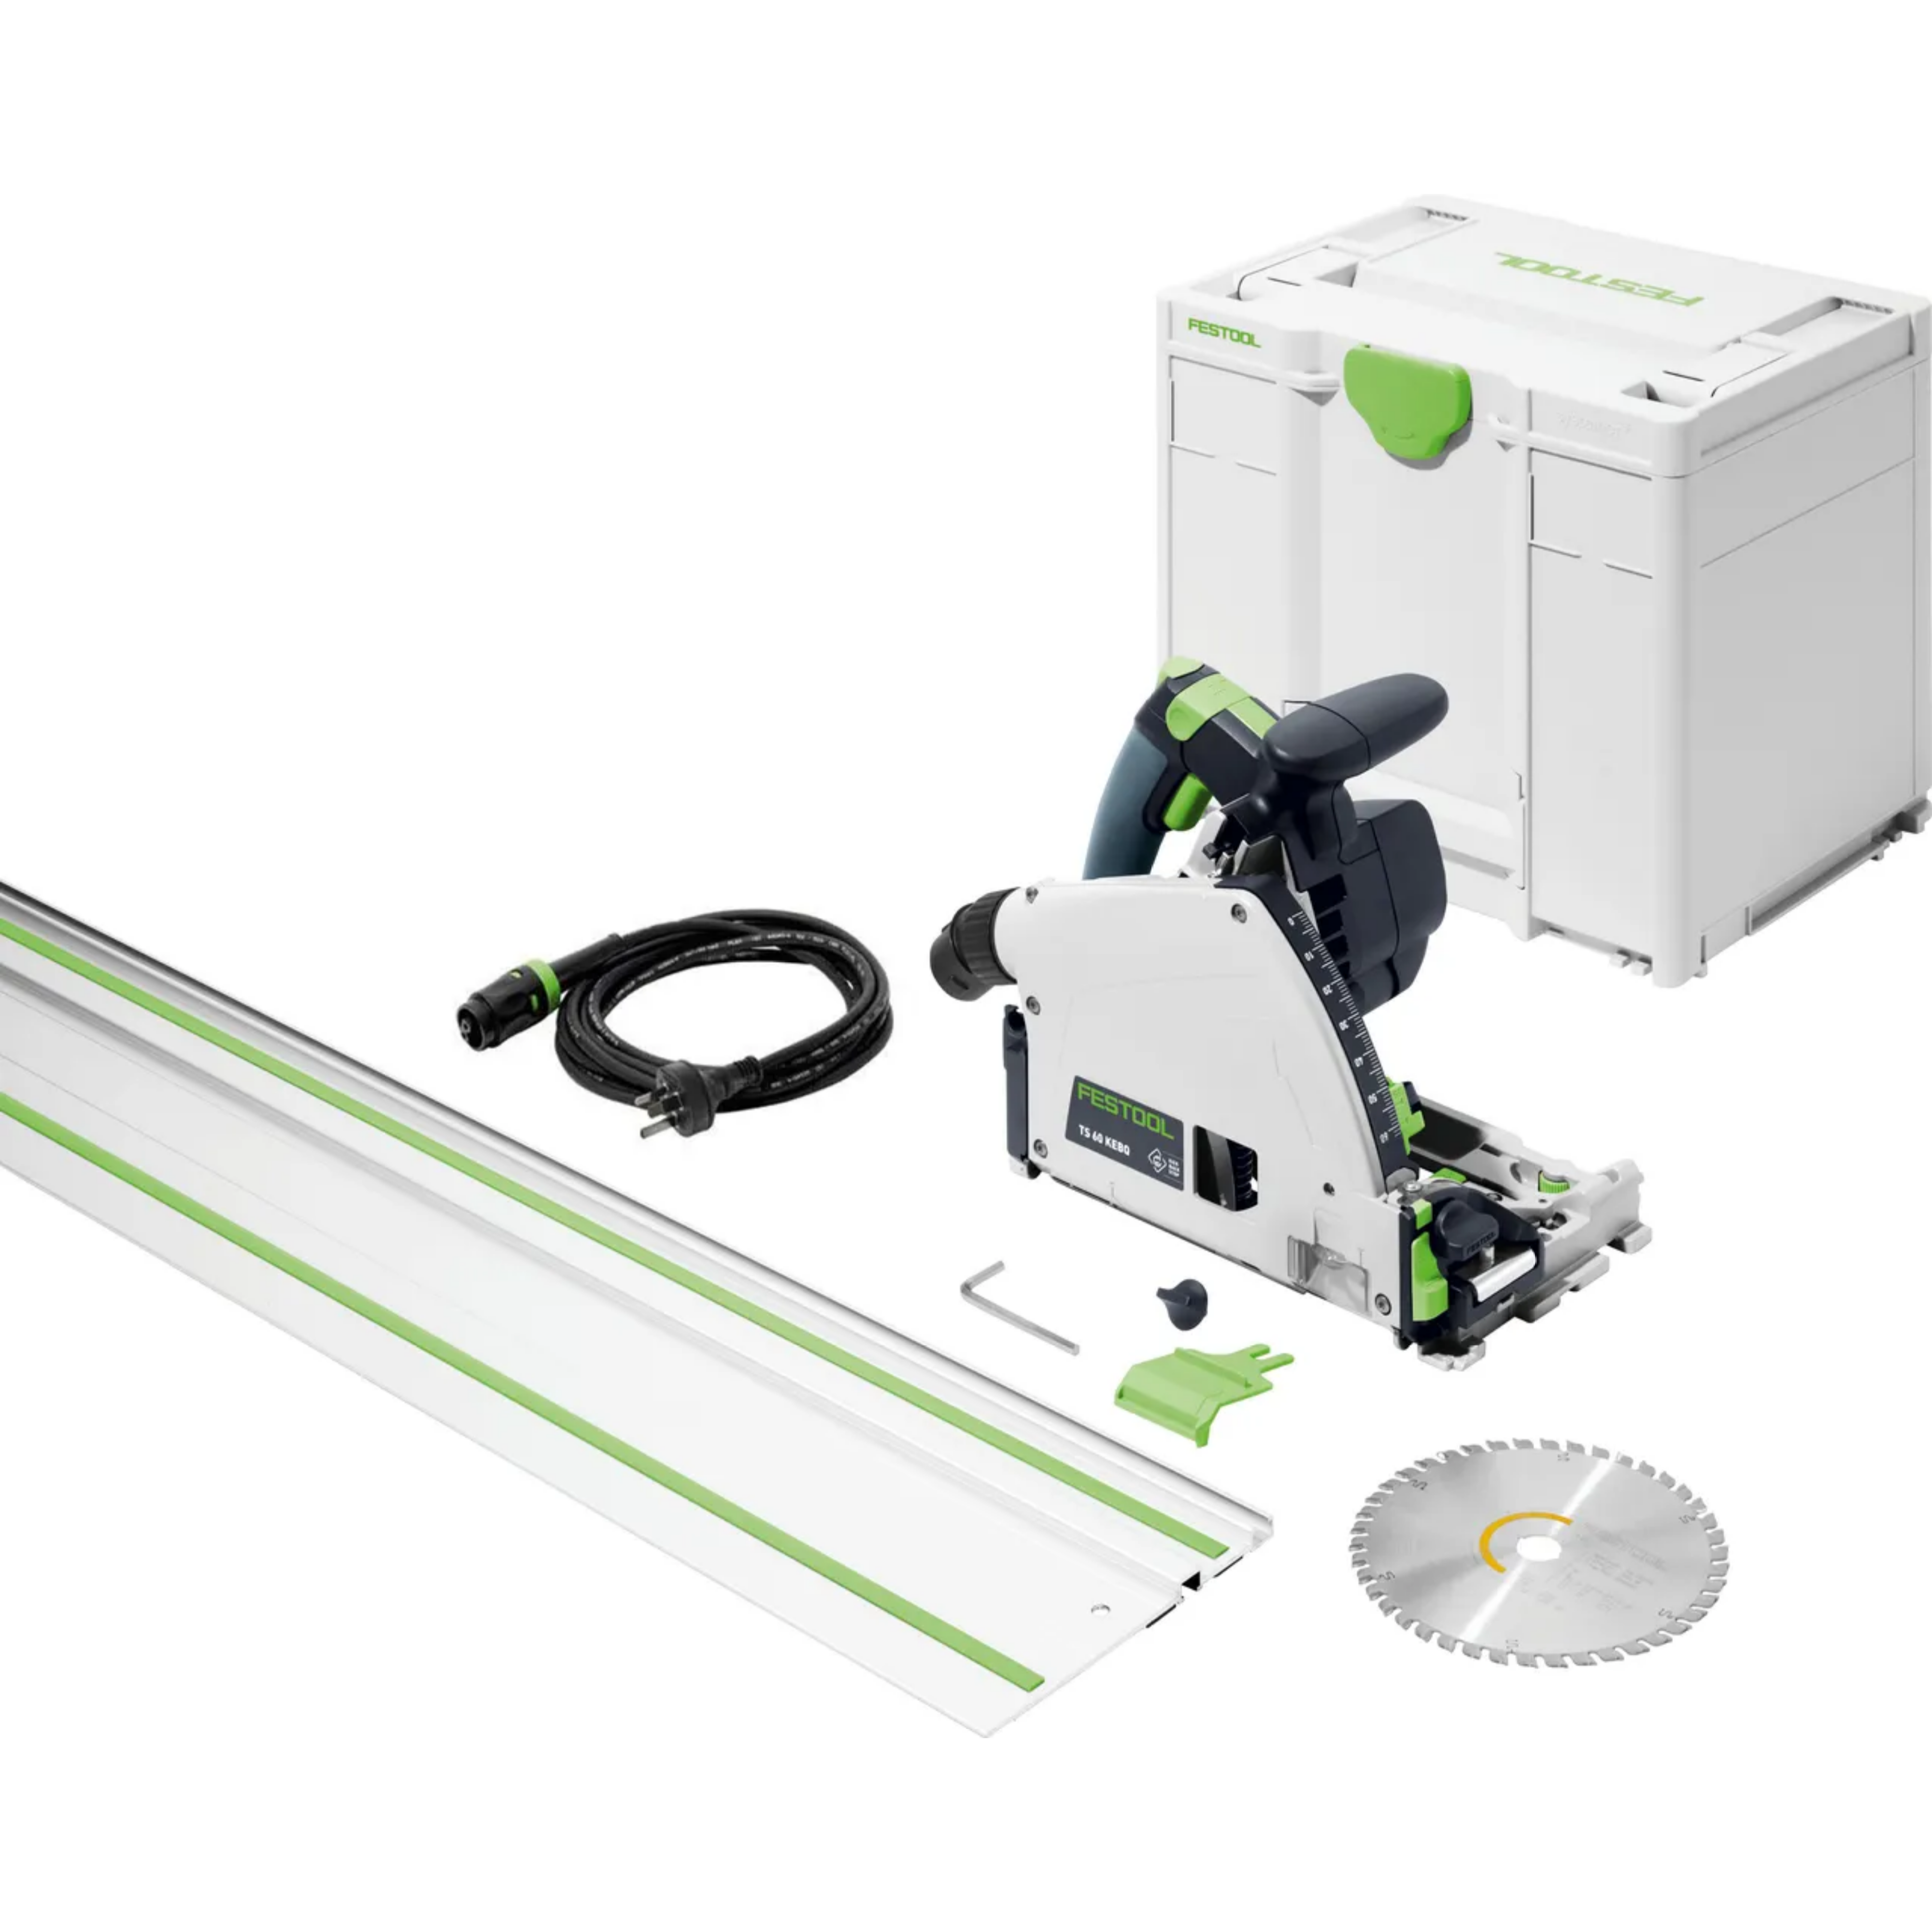 TS 60K 168mm Plunge Cut Saw in Systainer with 1400mm Rail 577419 by Festool